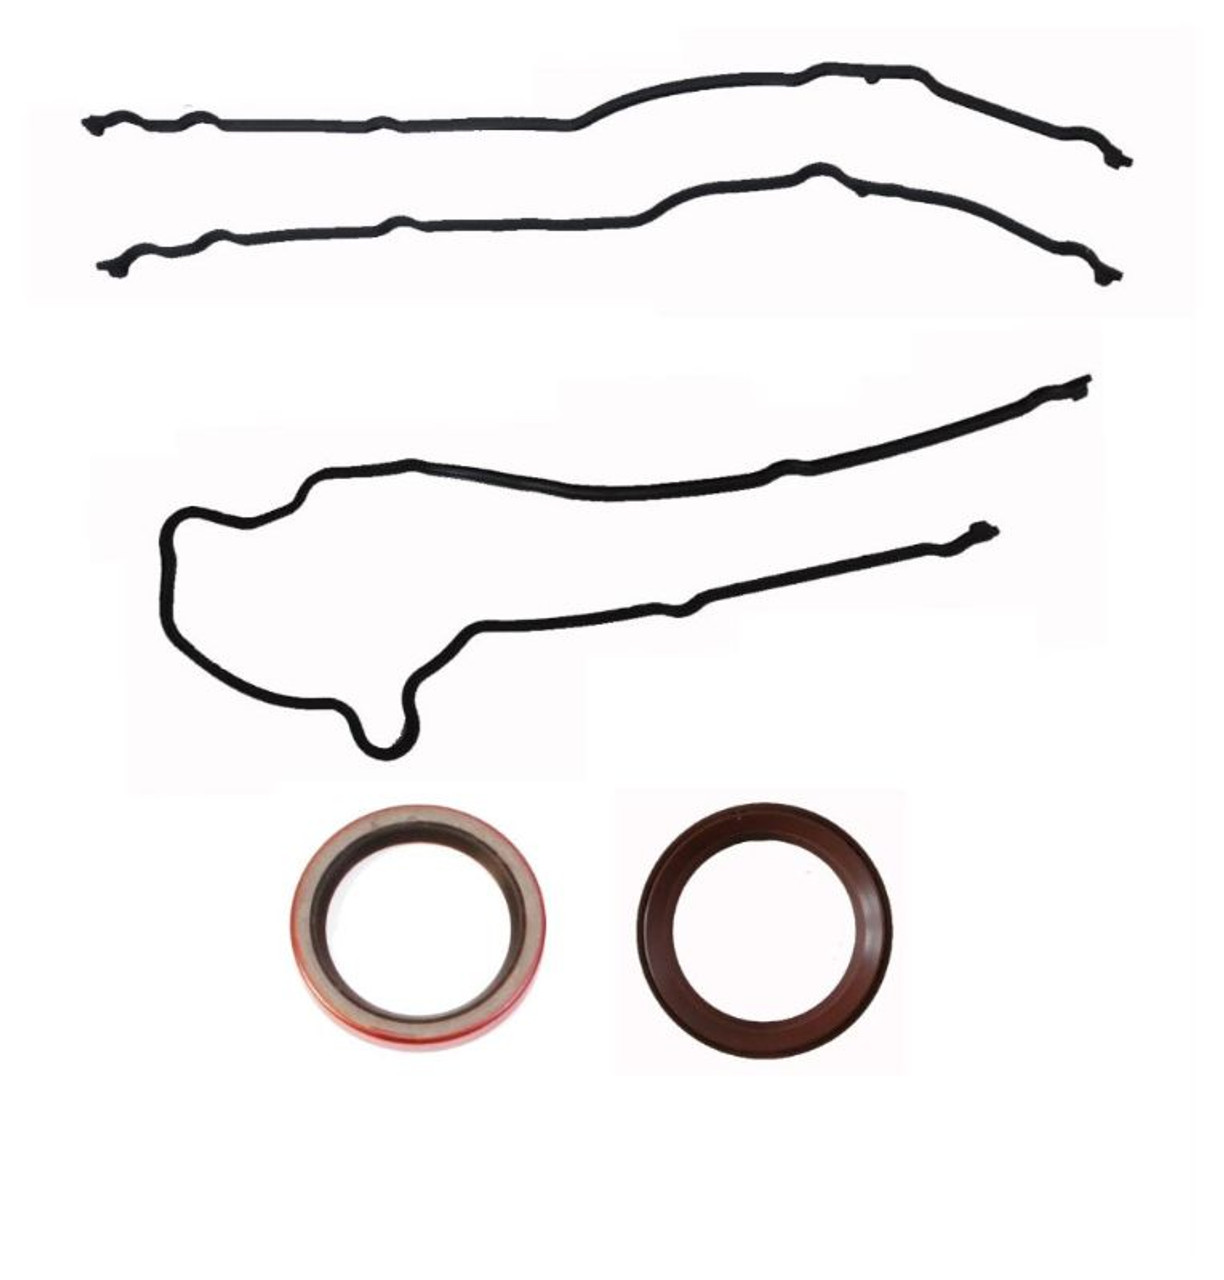 2003 Ford E-350 Club Wagon 5.4L Engine Timing Cover Gasket Set TCF330-A -151